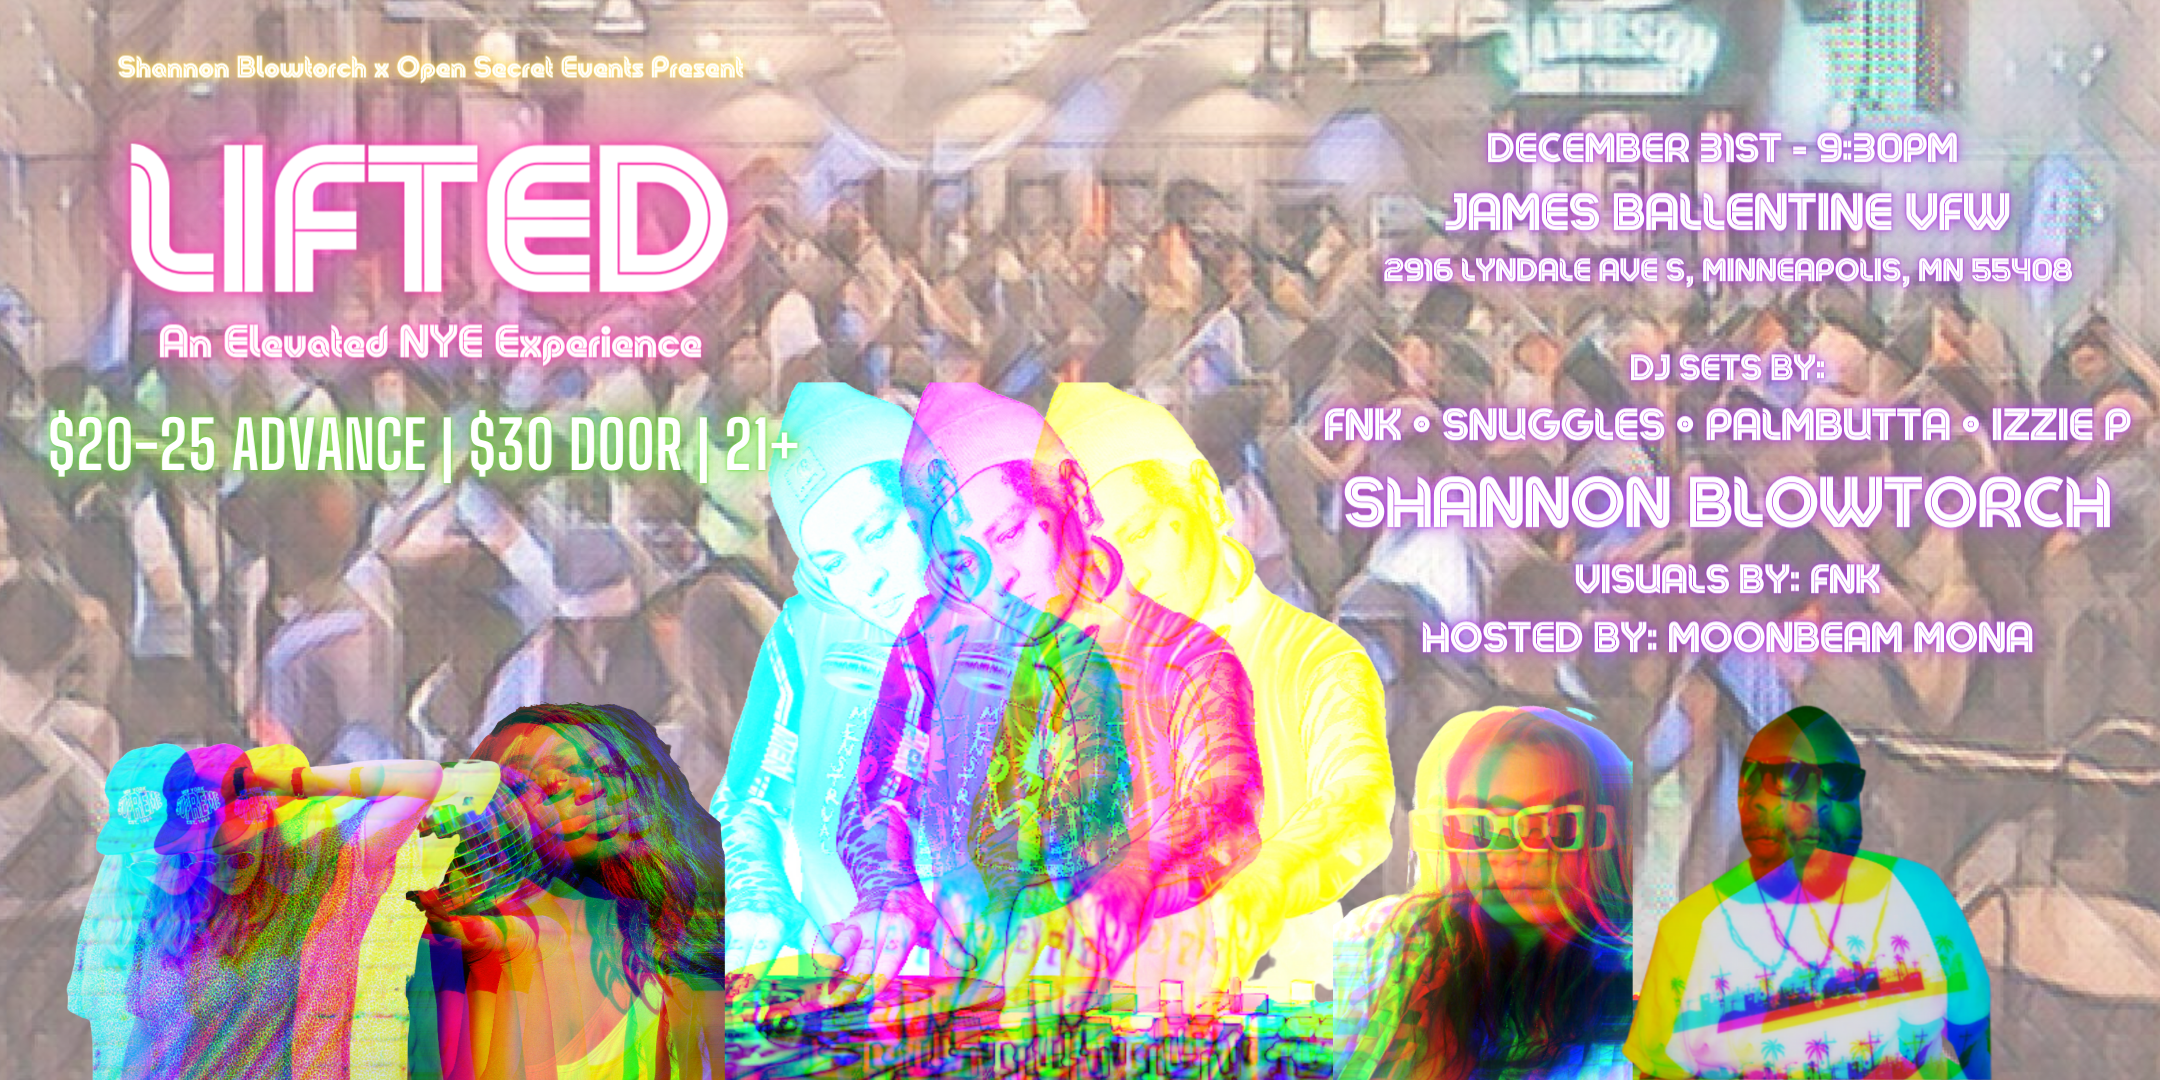 Shannon Blowtorch x Open Secret Events Present LIFTED :: An Elevated NYE Experience DJ Sets By: Shannon Blowtorch | FNK | Snuggles | PalmButta | Izzie P Visuals By: FNK Hosted By: Moonbeam Mona Sunday, December 31 James Ballentine "Uptown" VFW Post 246 Doors 9:30pm :: Music 9:30pm :: 21+ General Admission $20.00 Advance (Before Nov. 30) / $25.00 Advance (Nov 30-Dec 30) / $30.00 (Day Of Show) NO REFUNDS Tickets On-Sale Now